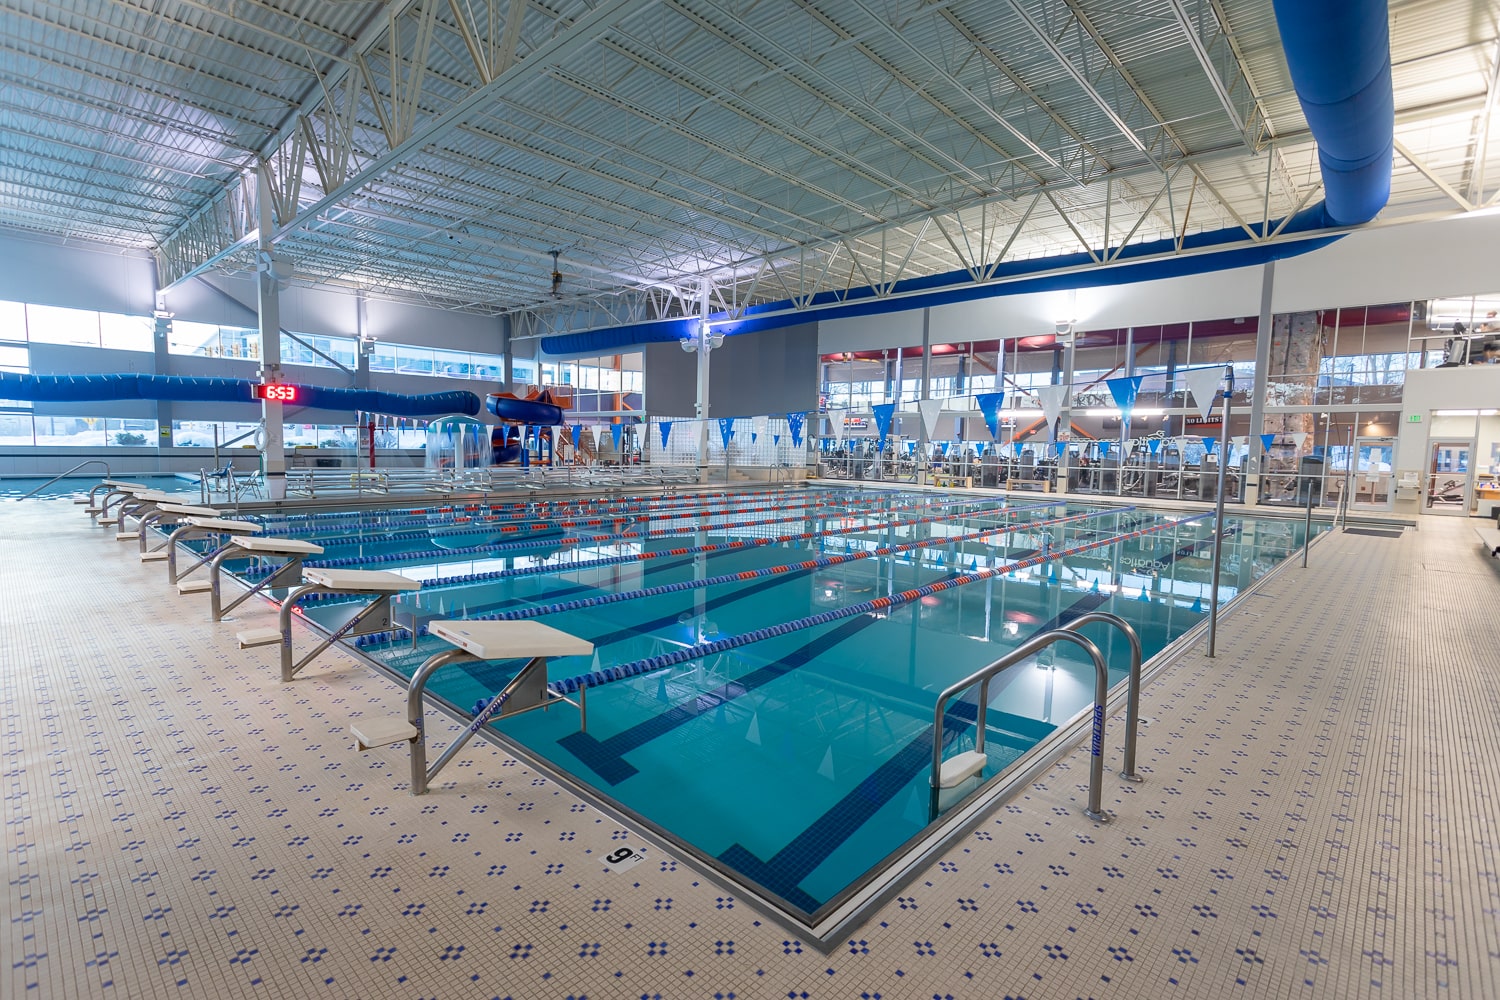 Indoor Lap Pools at Workout Club in Salem